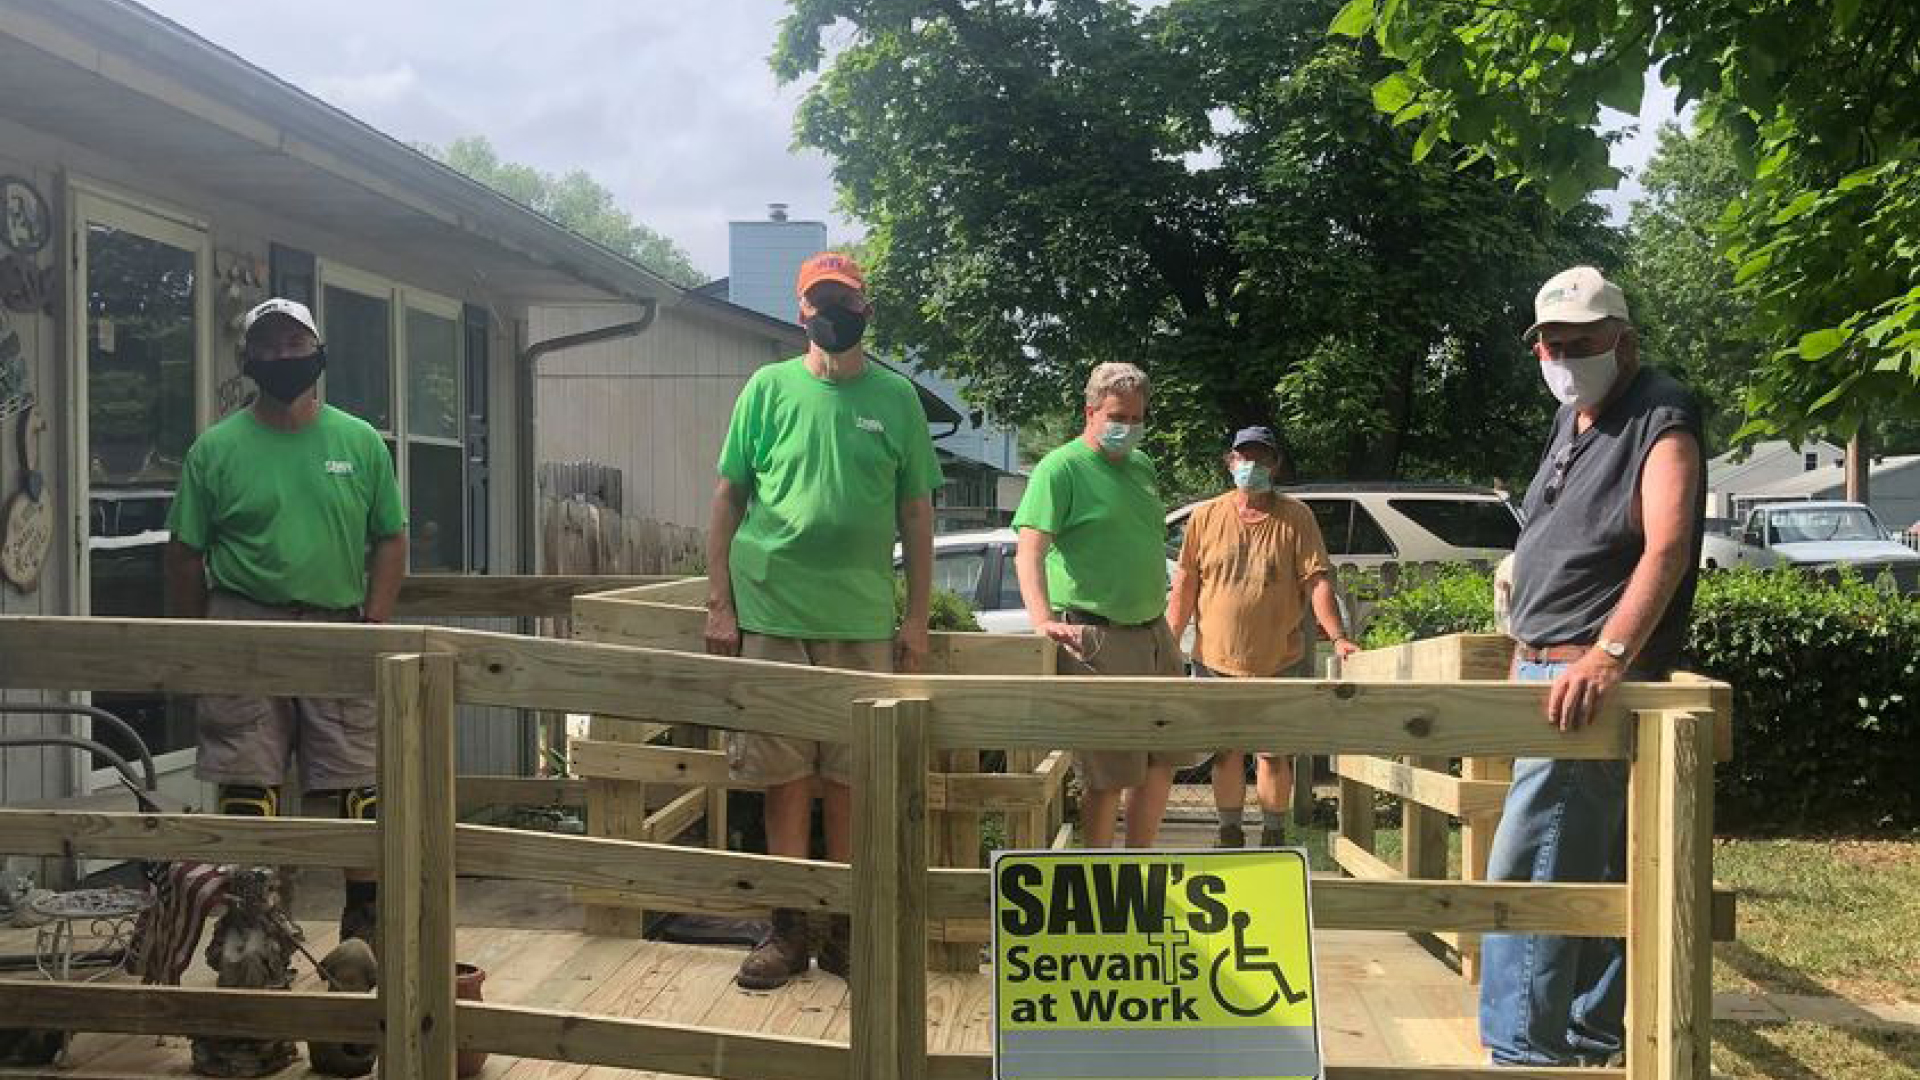 SAWs Ramp Building
Impacting the lives for low-income and disabled individuals, one ramp at a time.
